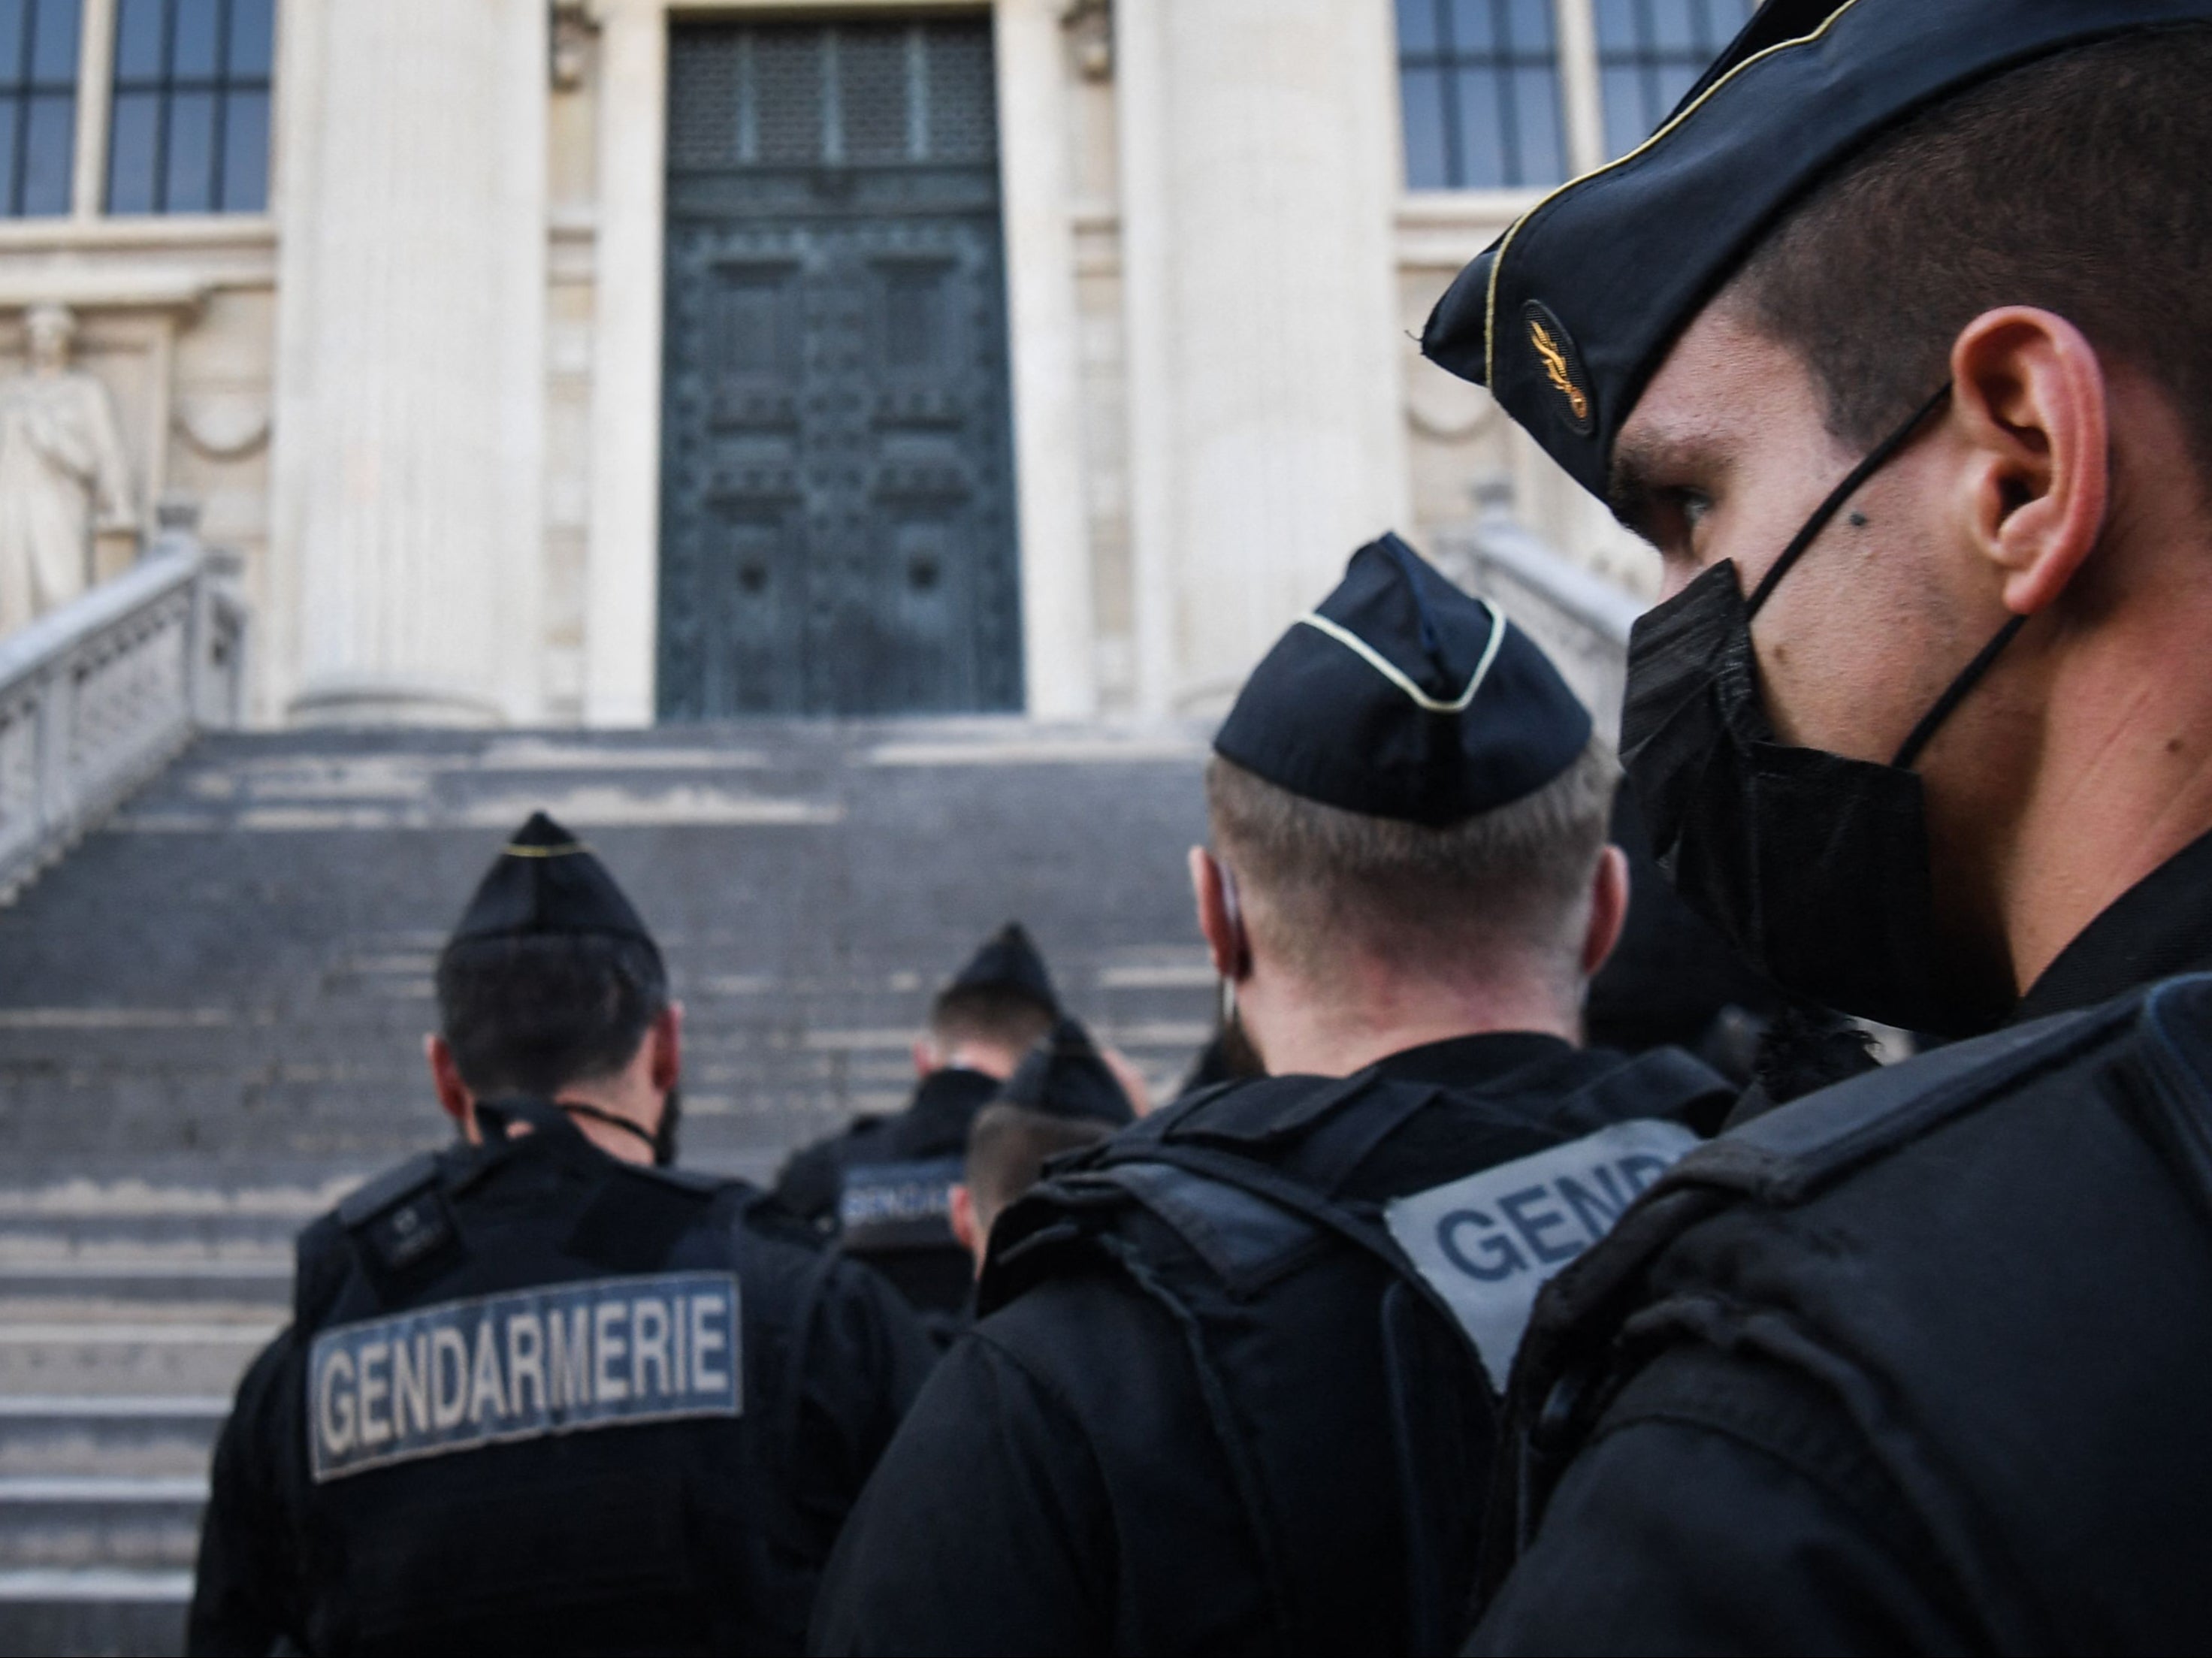 French Gendarmes arrive at the Palais de Justice of Paris ahead of the start of the trial into the 2015 Paris attacks